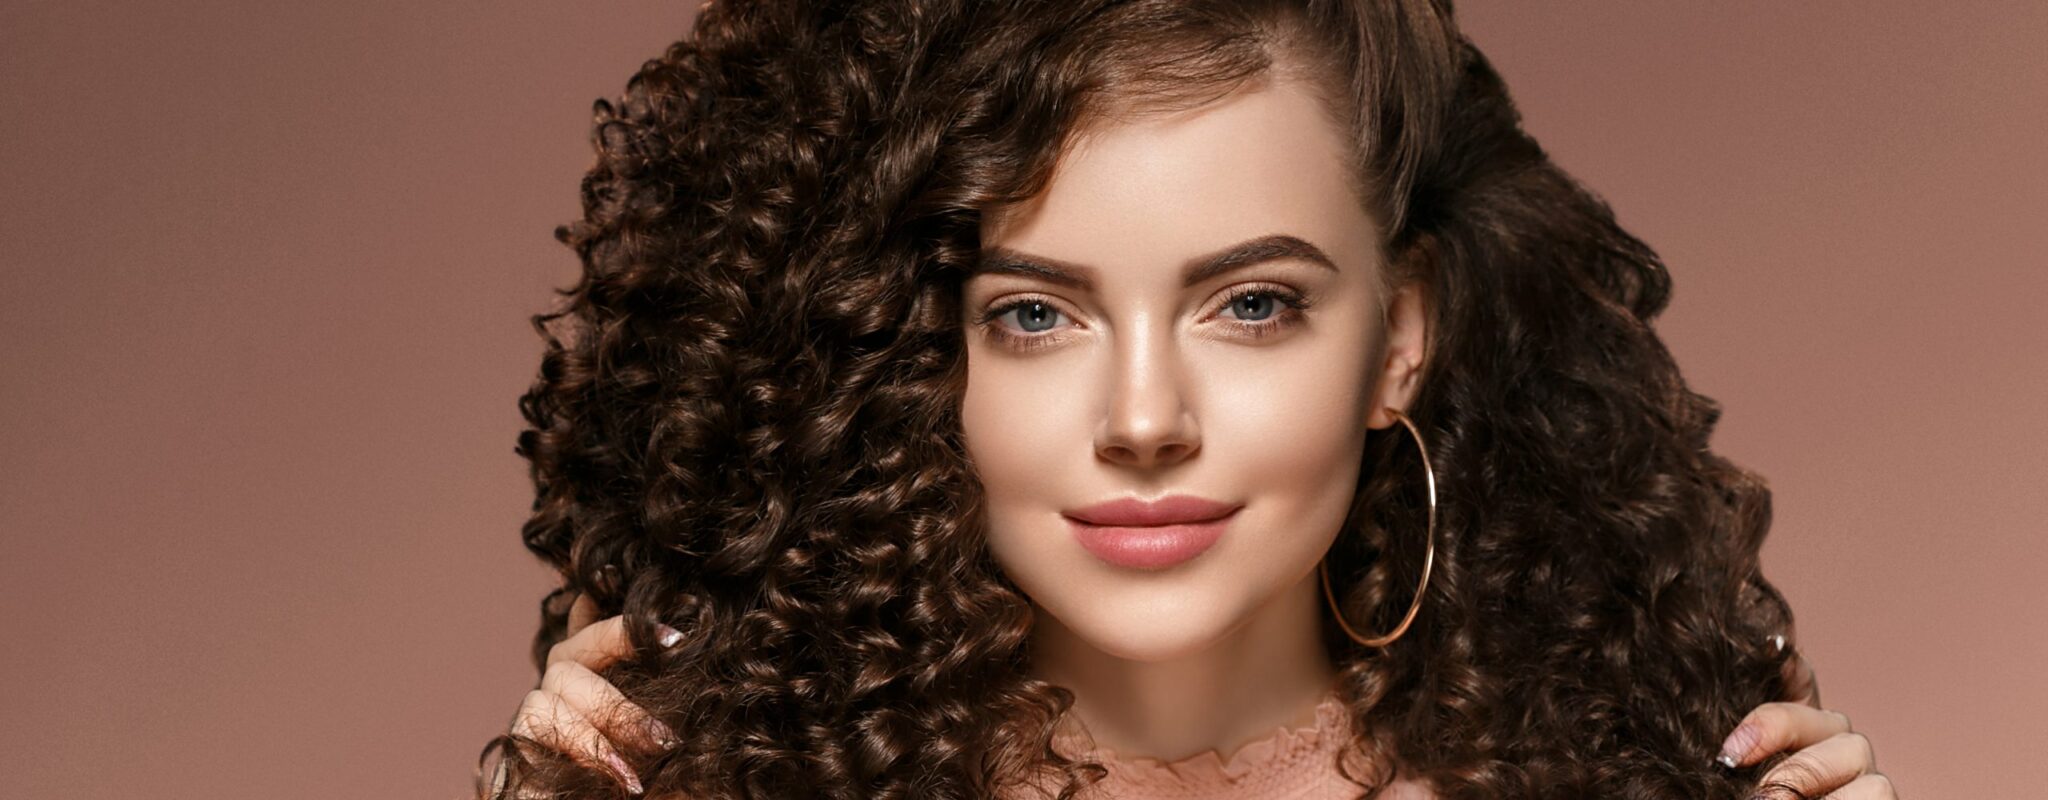 Ways to Grow Curly Hair Faster and Longer ft